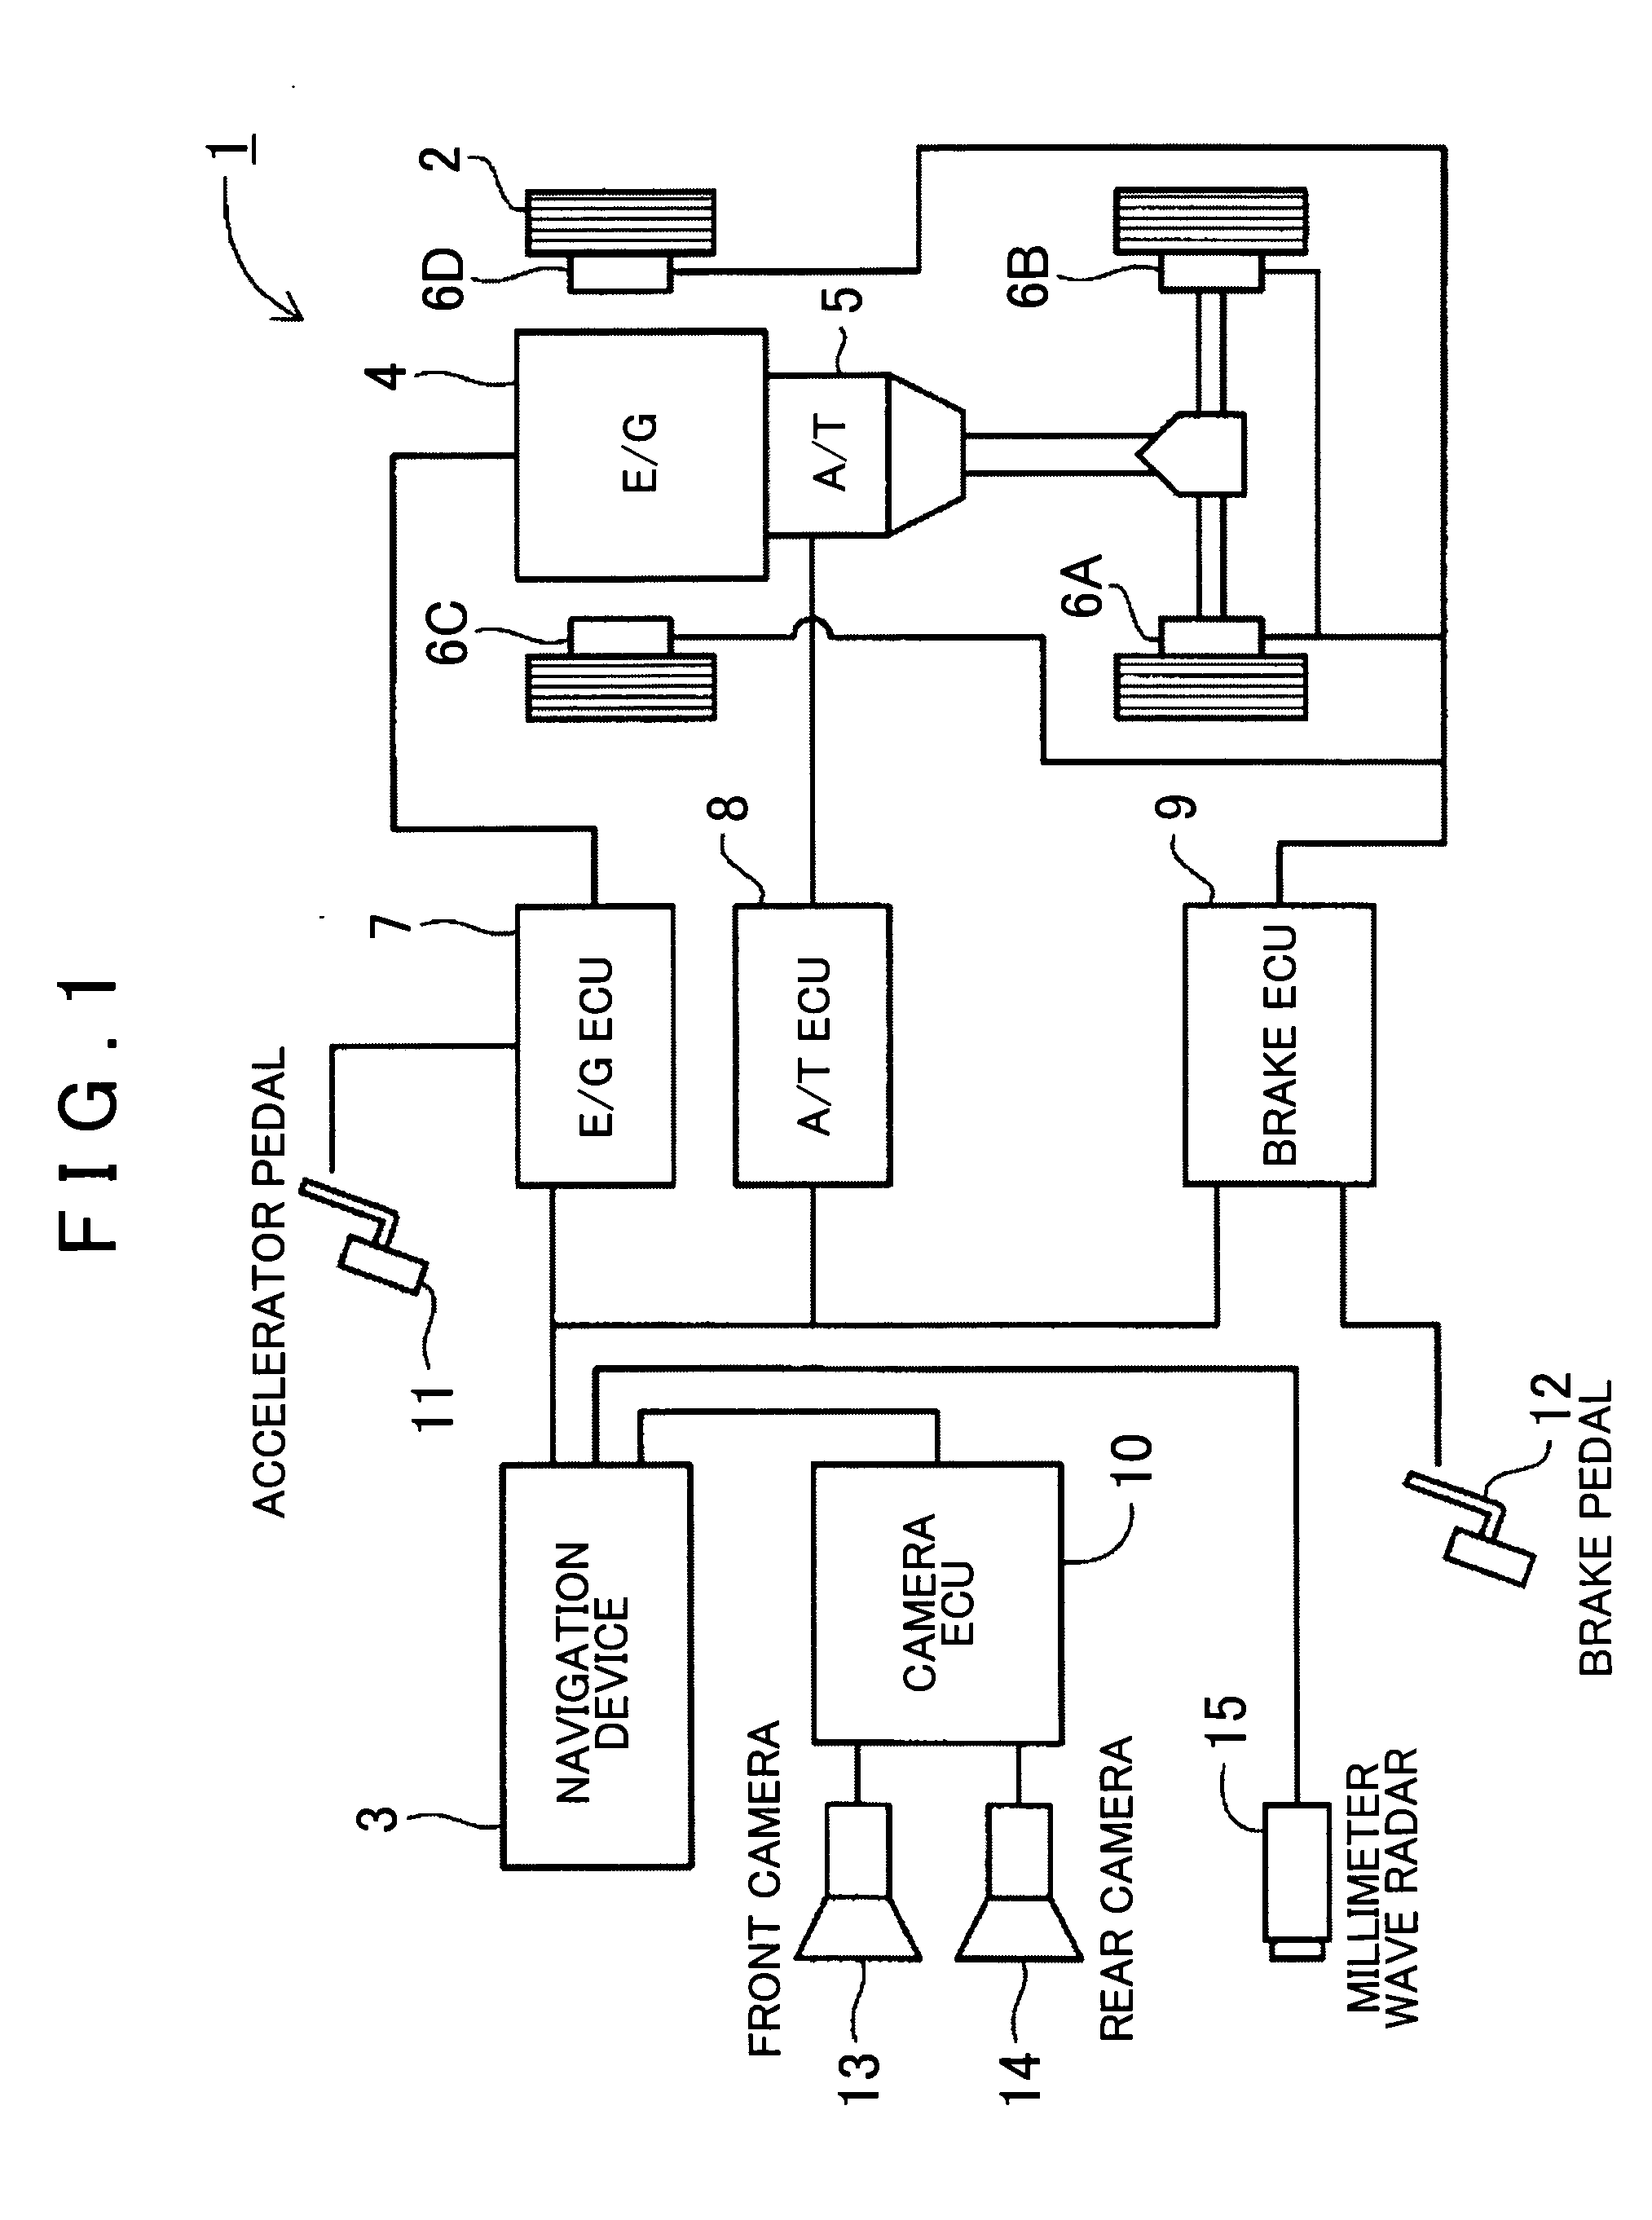 Vehicle control device, vehicle control method and computer program